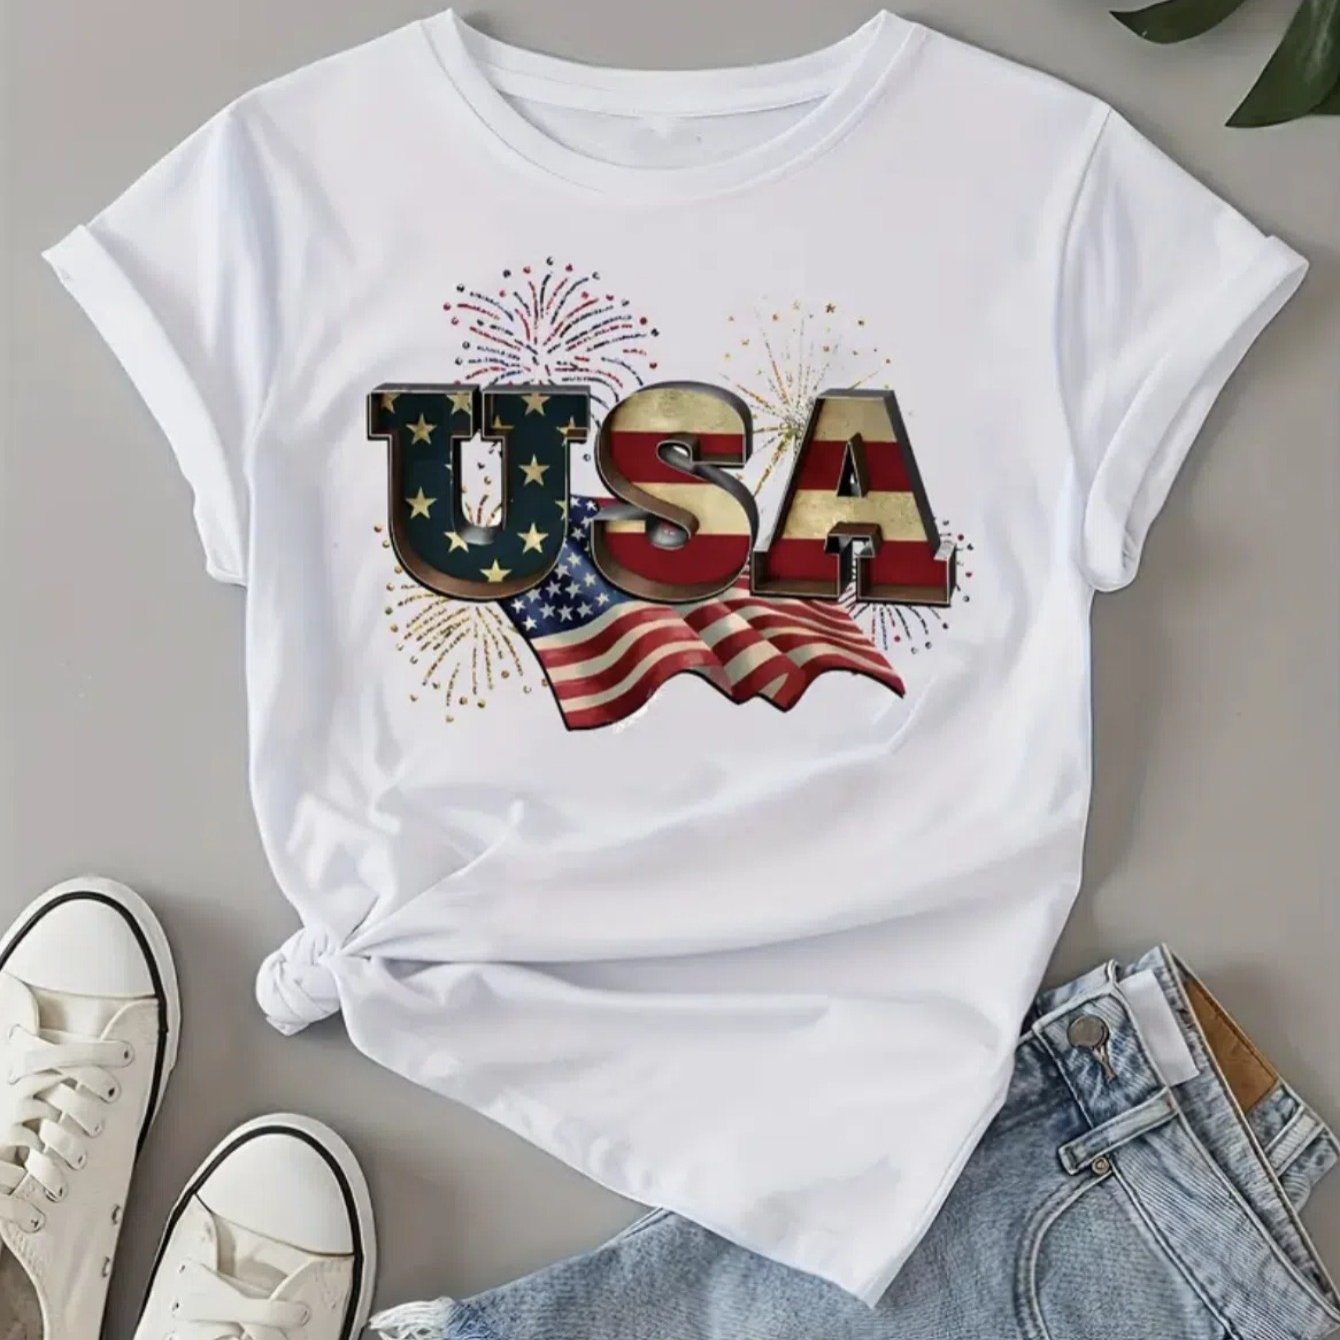 

Women's Chic Usa Flag Print Tee - Comfy, Casual Short Sleeve Crew Neck T-shirt For Everyday Wear & Stylish Layering